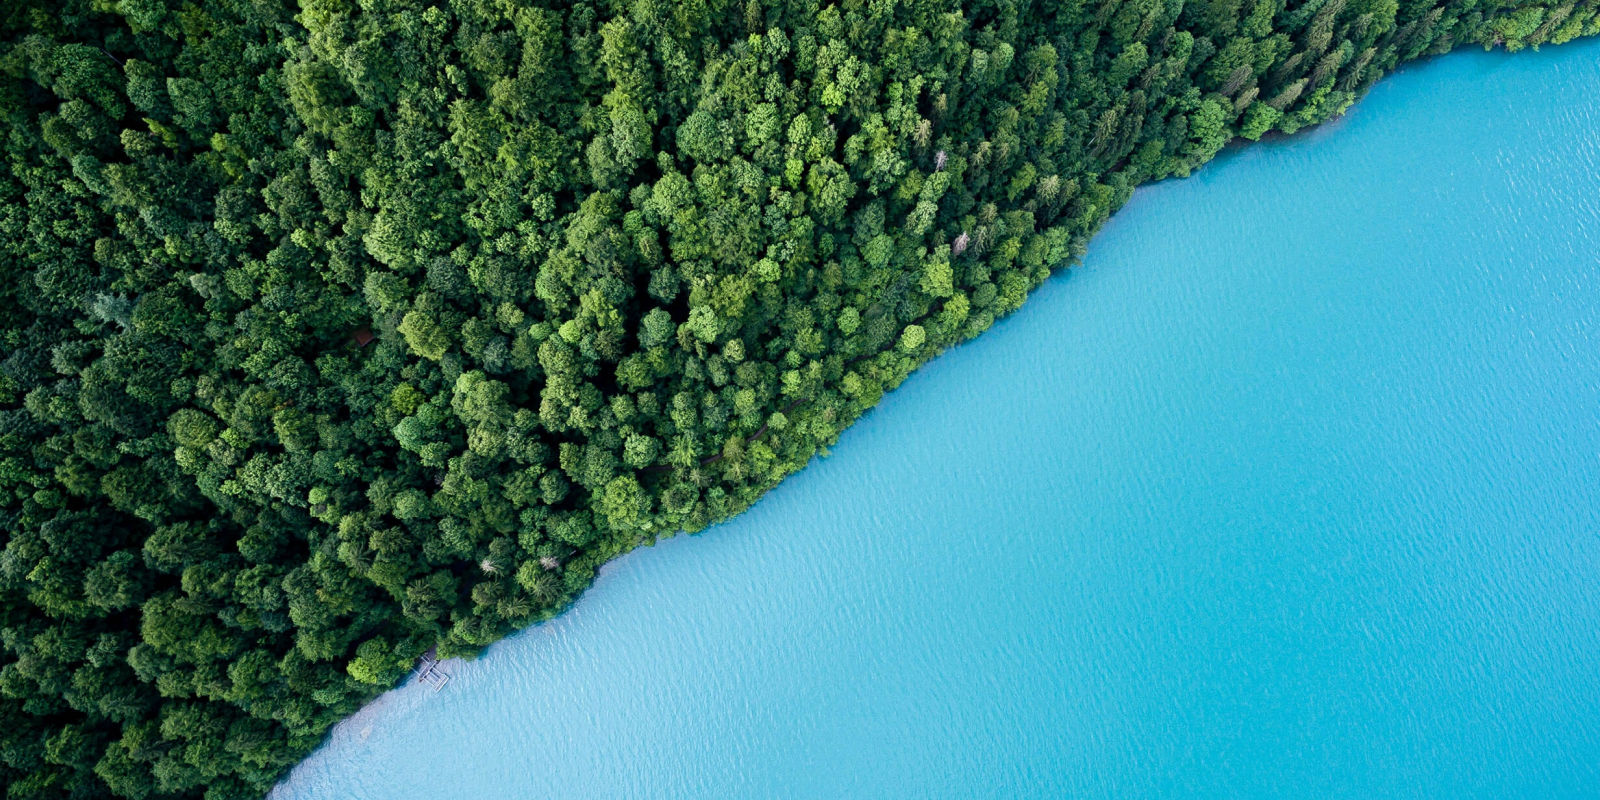 Bird's eye view photography of trees and body of water